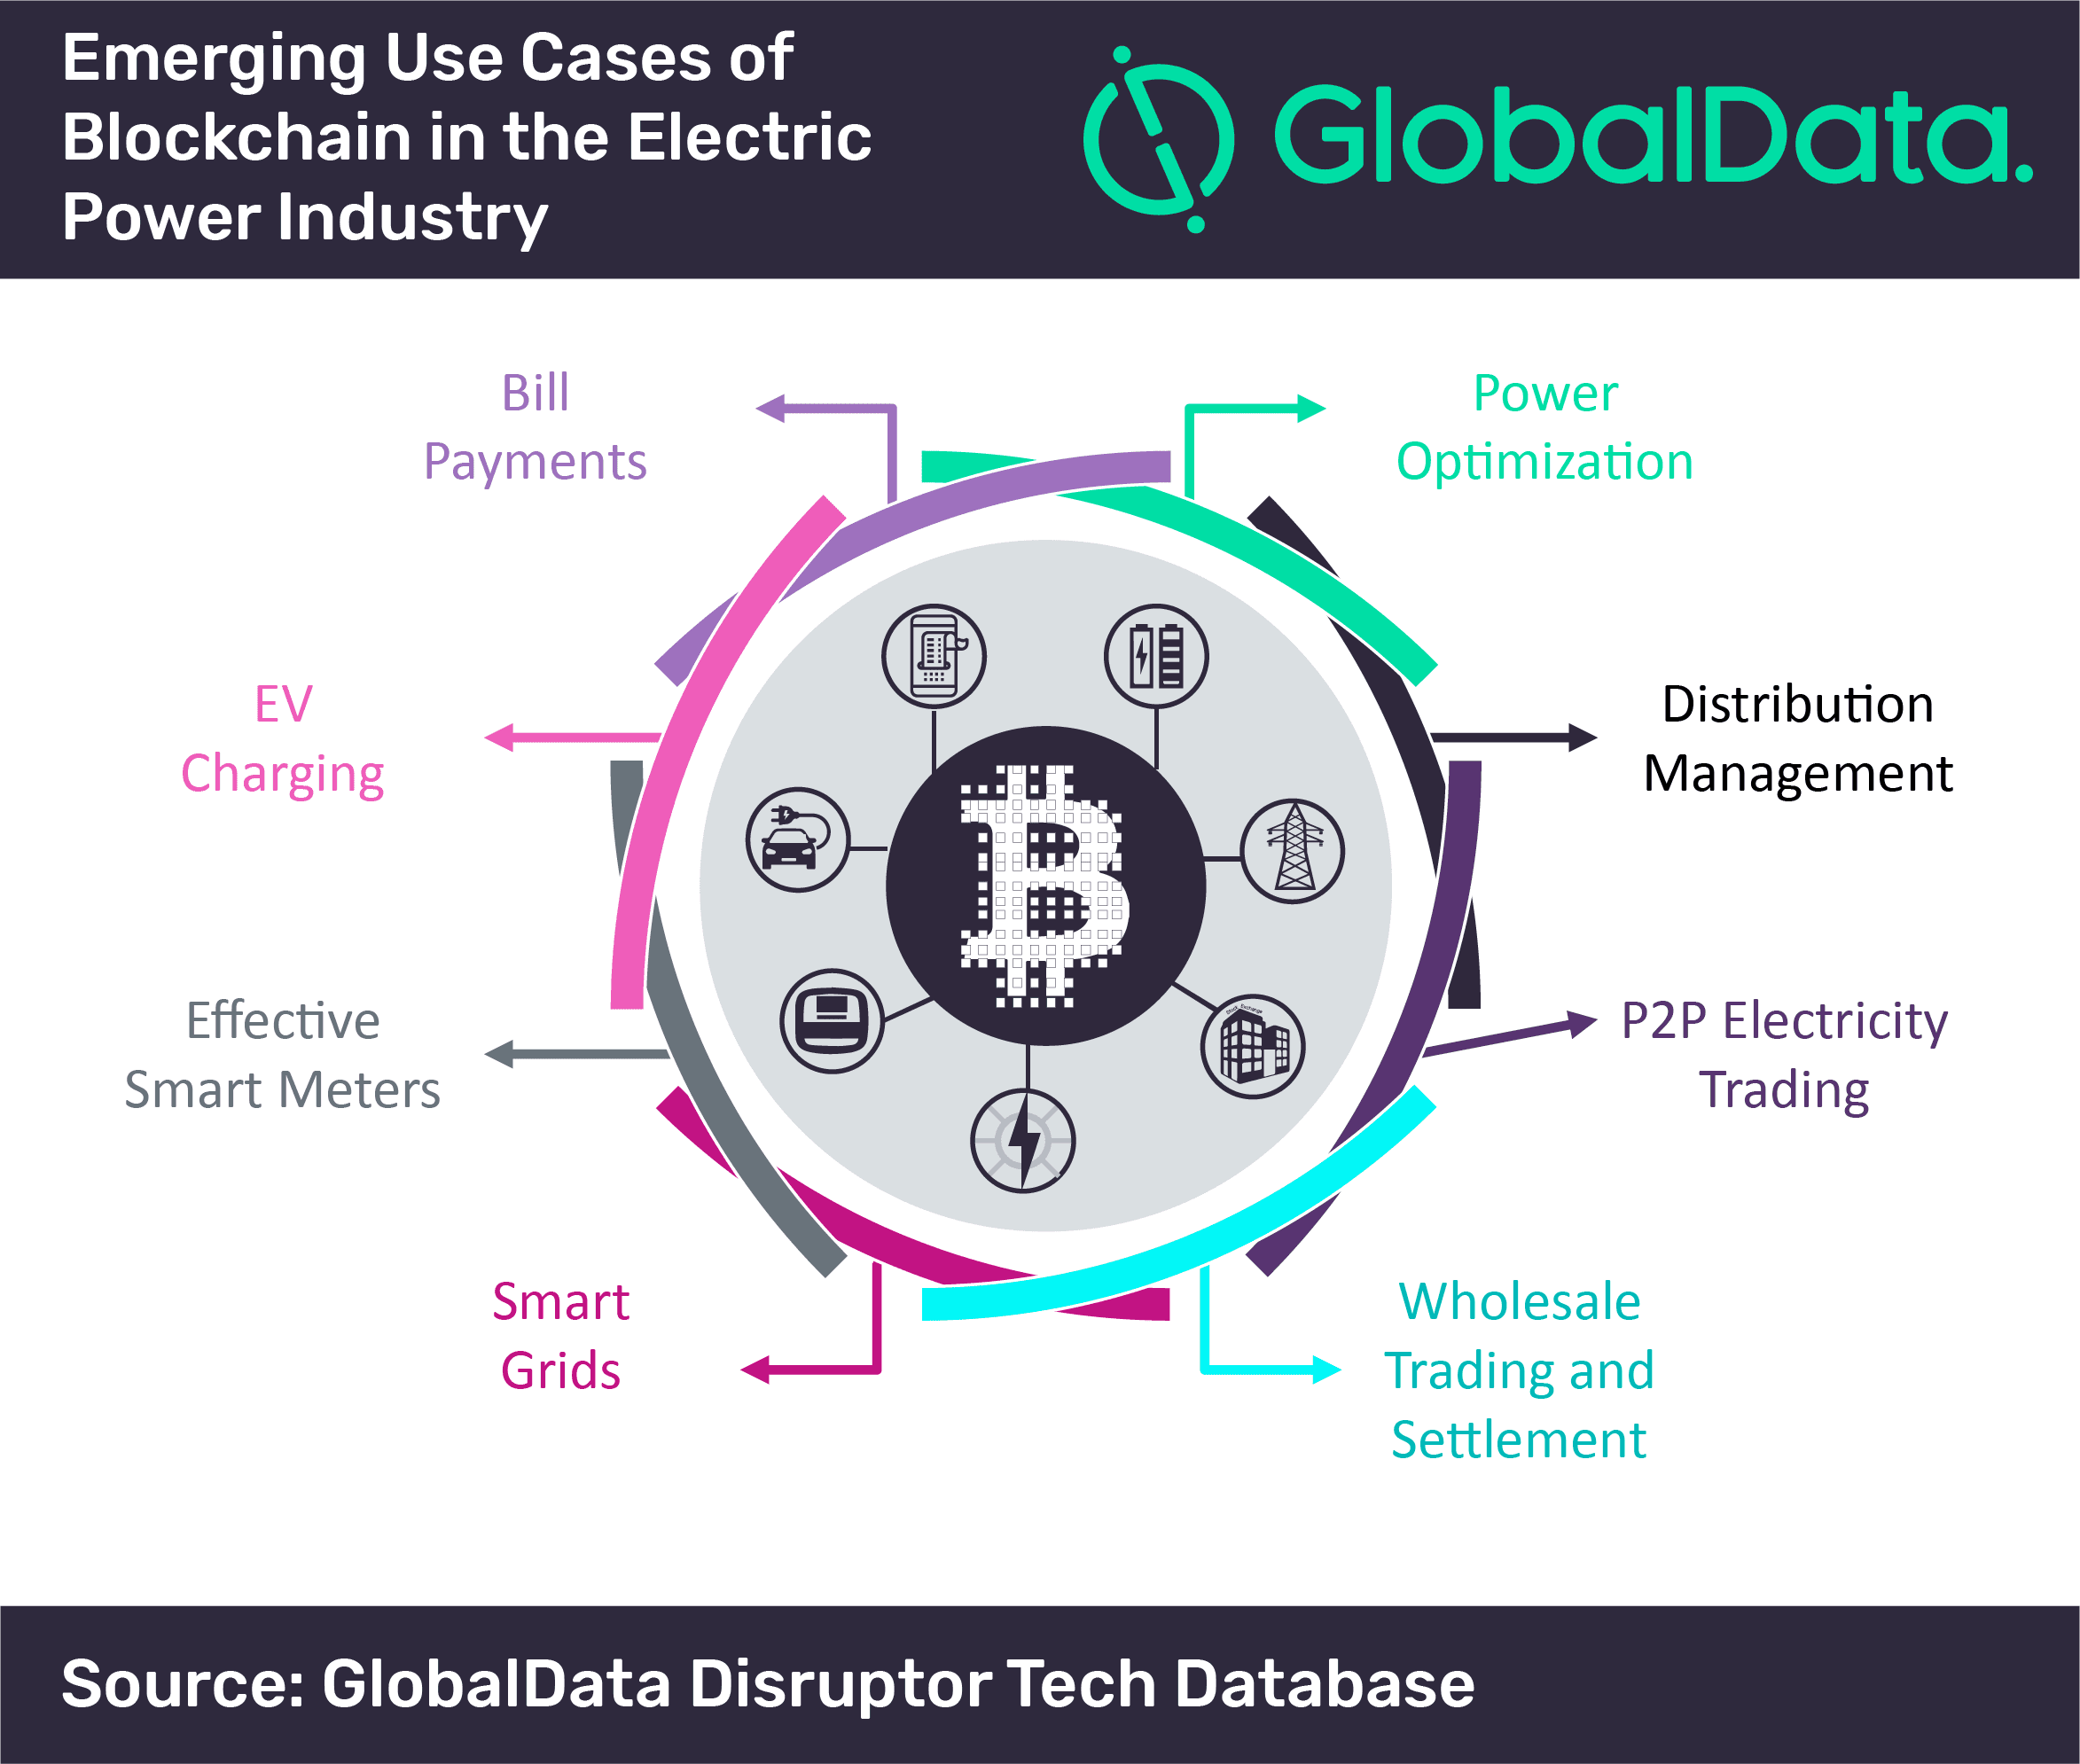 Emerging use cases of blockchain in the electric power industry. Source: GlobalData